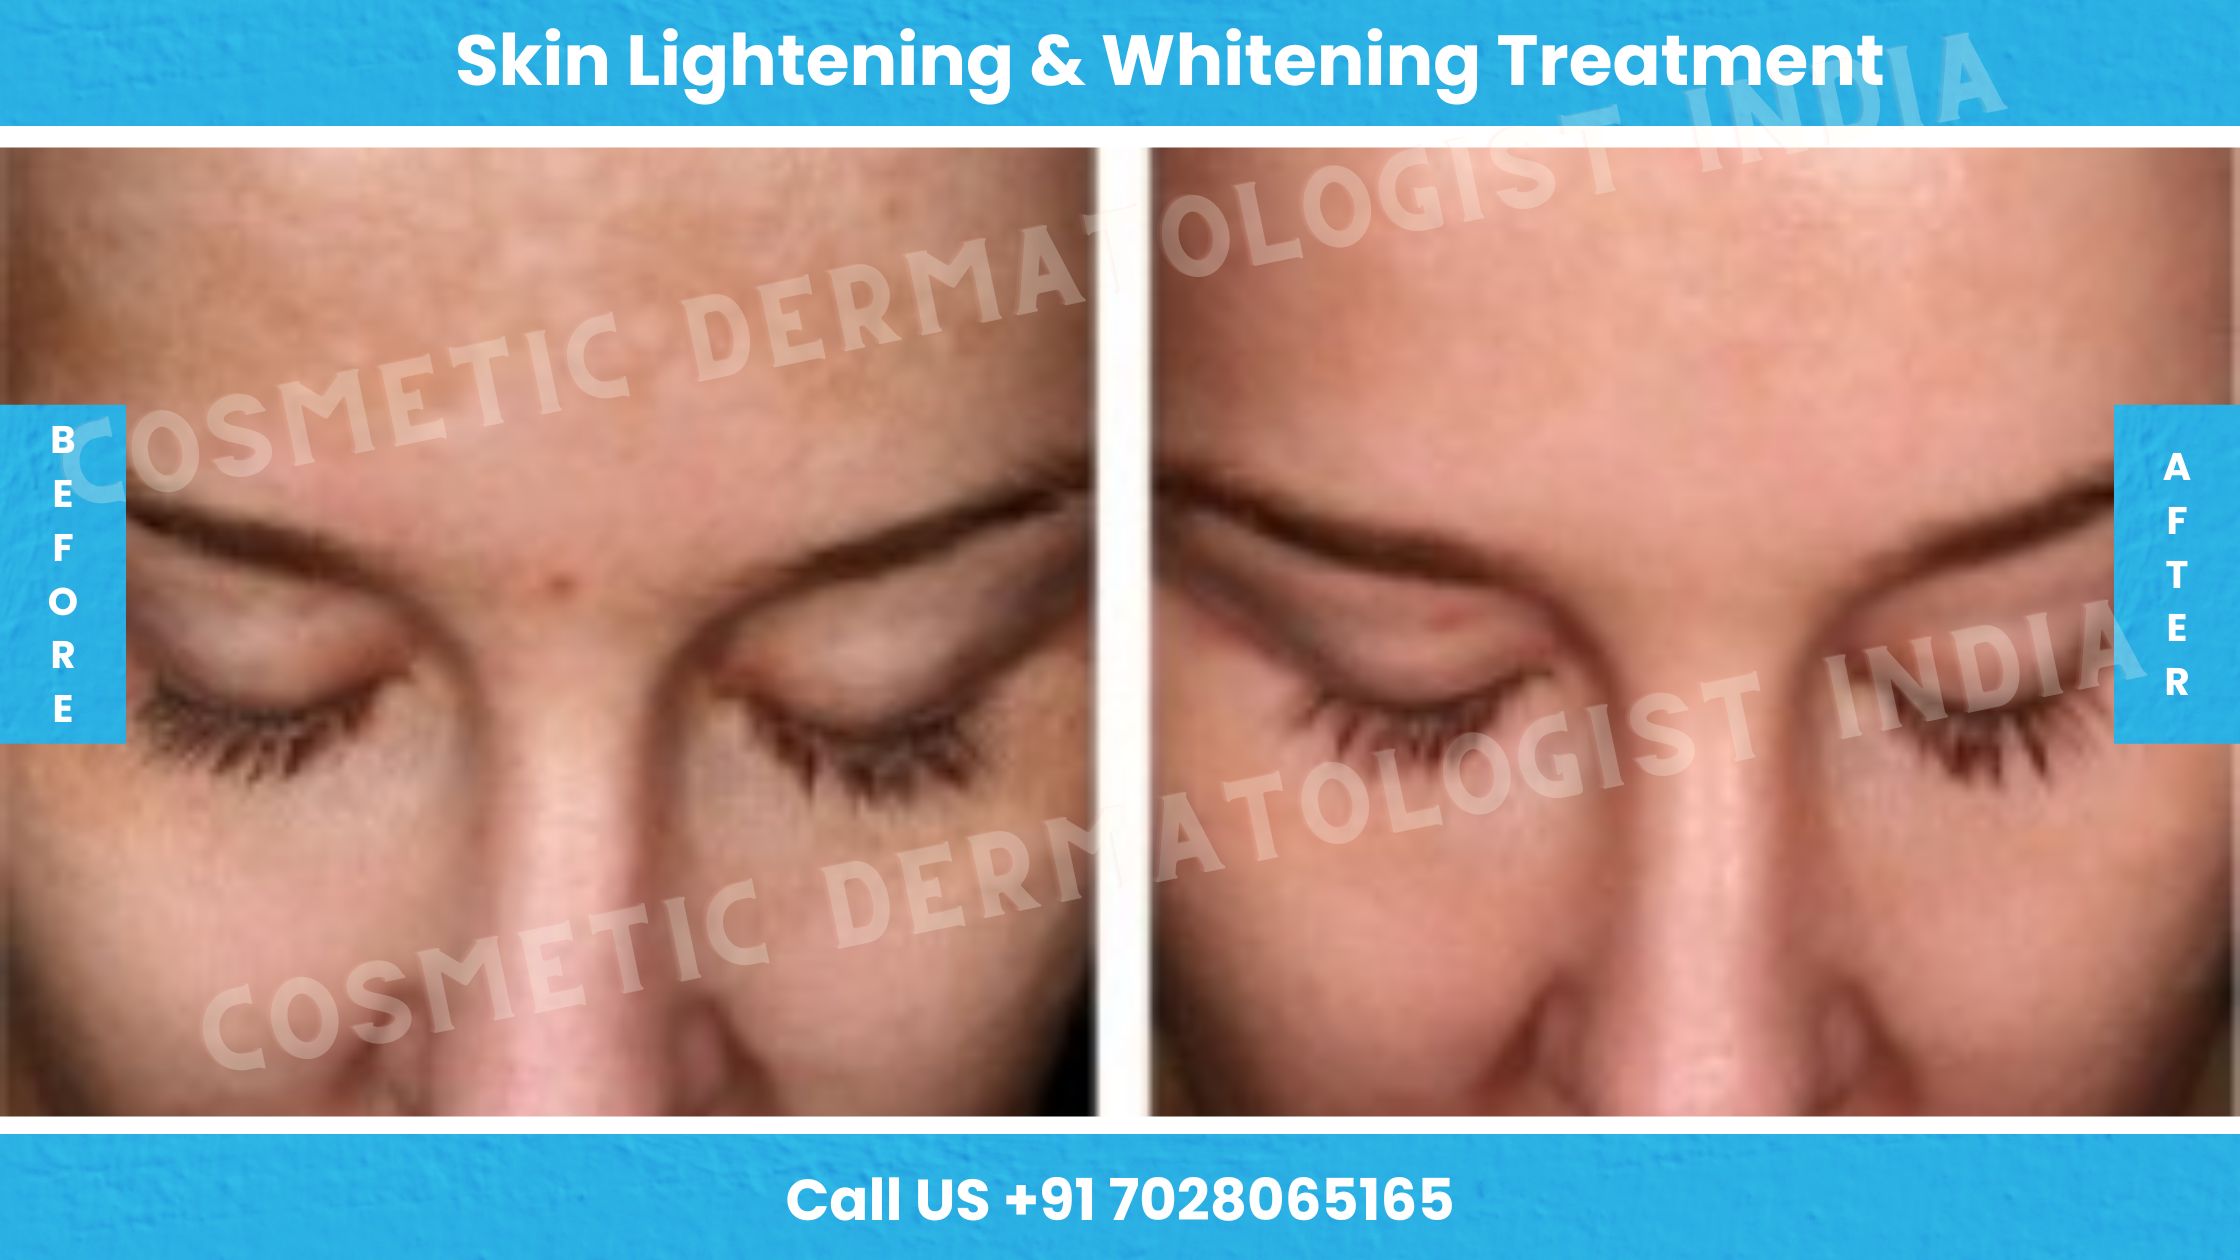 Before and After Images of Laser Skin Lightening and Whitening Treatment